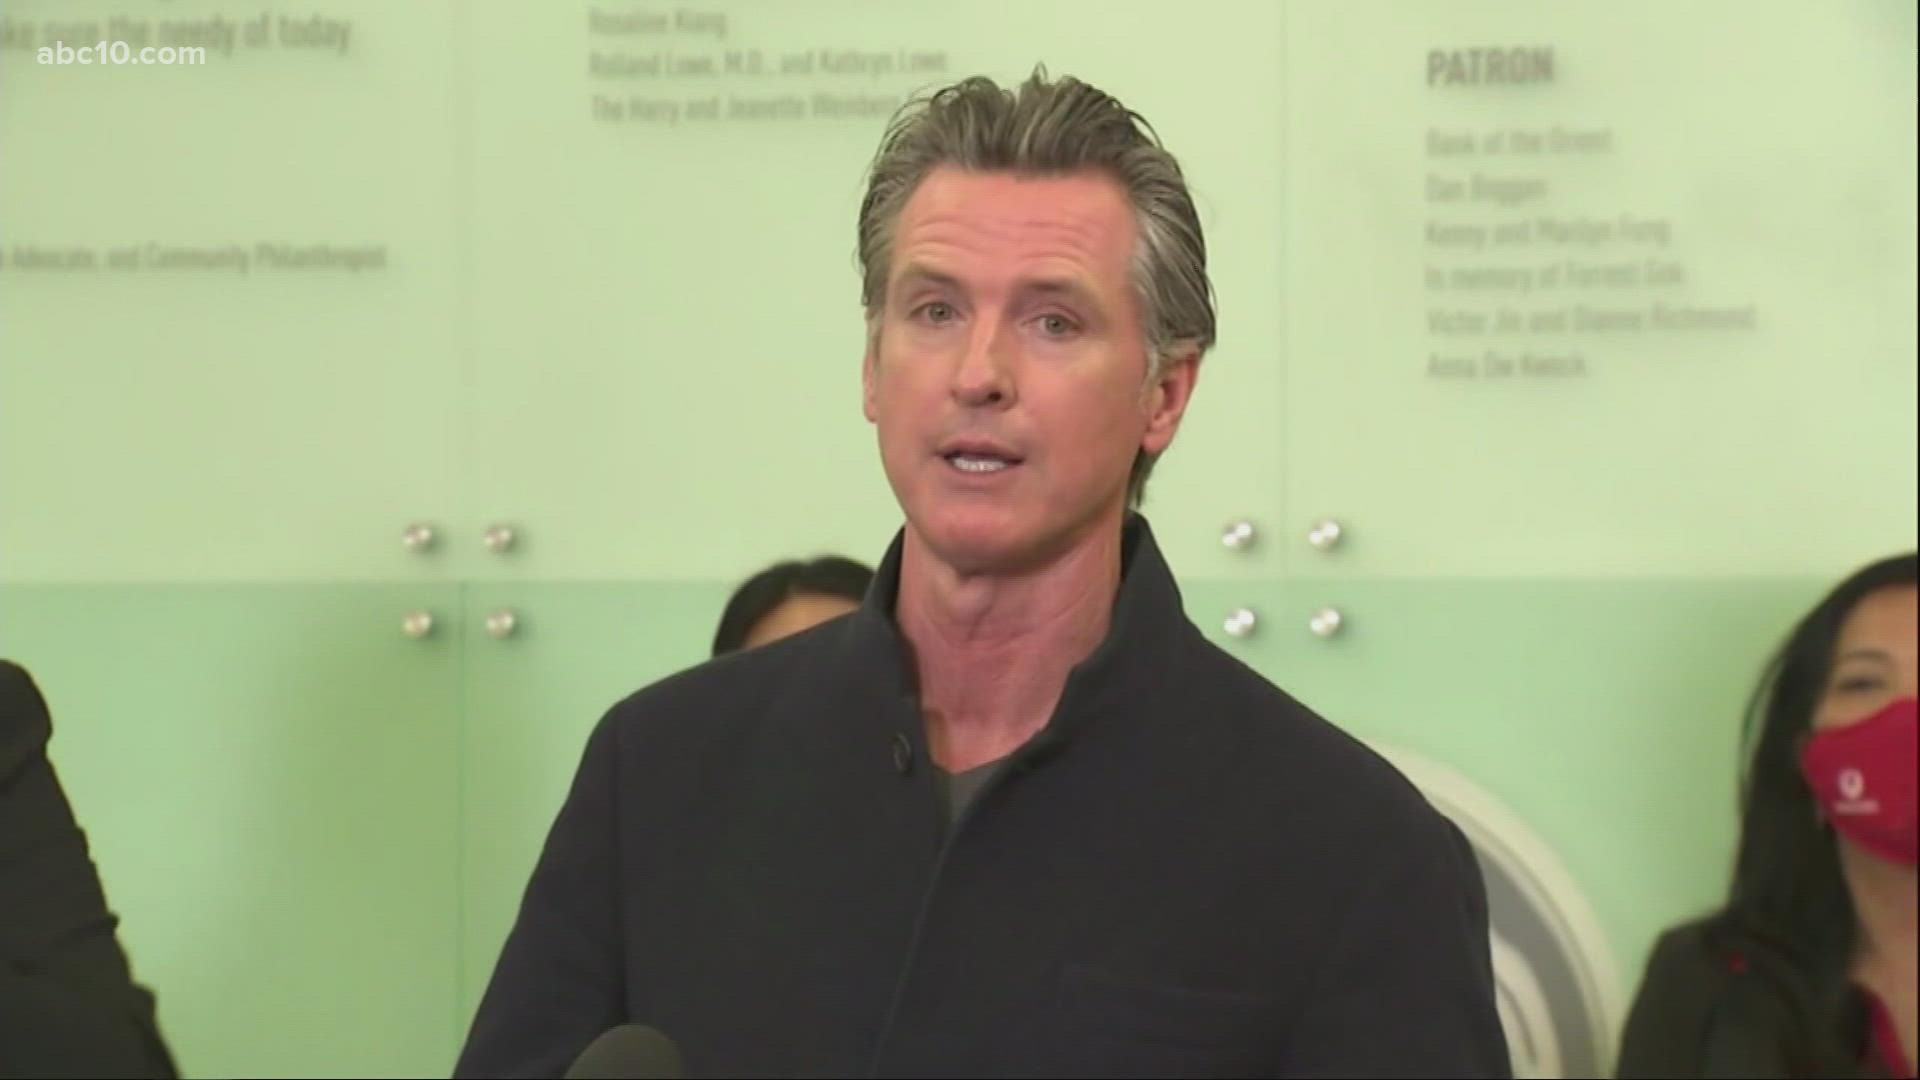 ABC10 political reporter Morgan Rynor explains what Gov. Newsom had to say about only 66% of state employees being vaccinated.